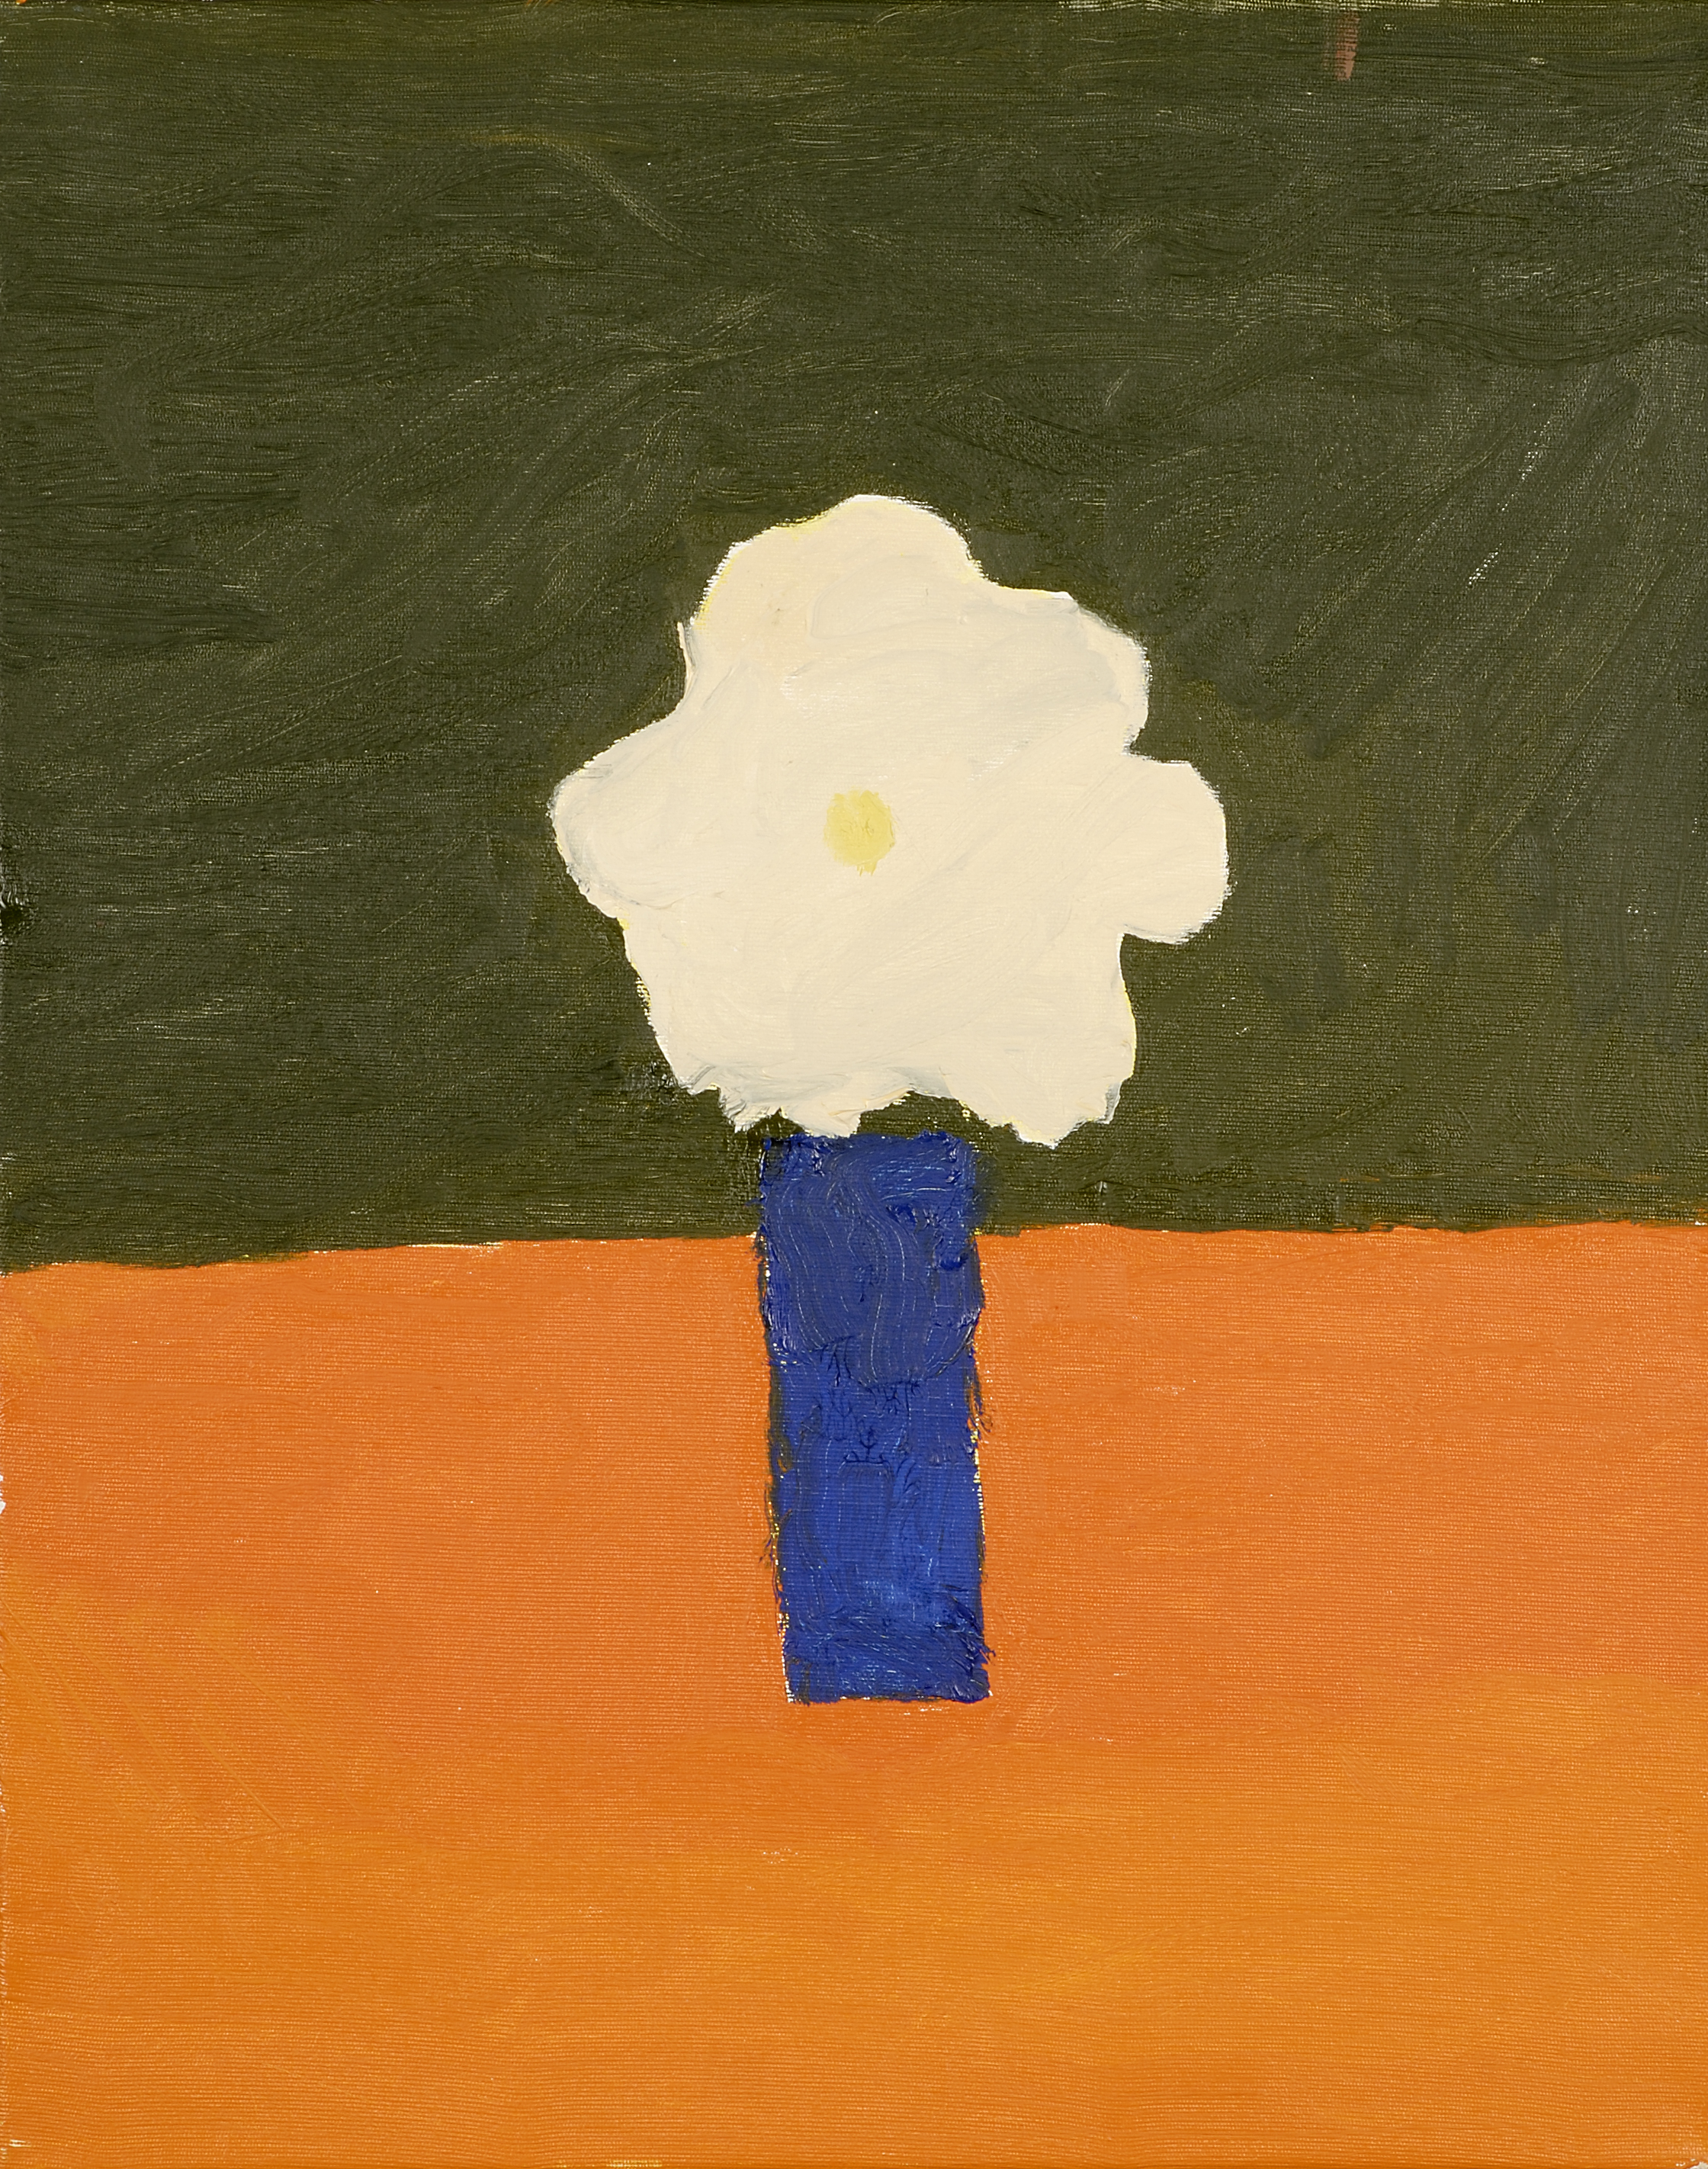 Painting is of a white flower in blue vase, the background is in green and orange. The painting is by James Duncan